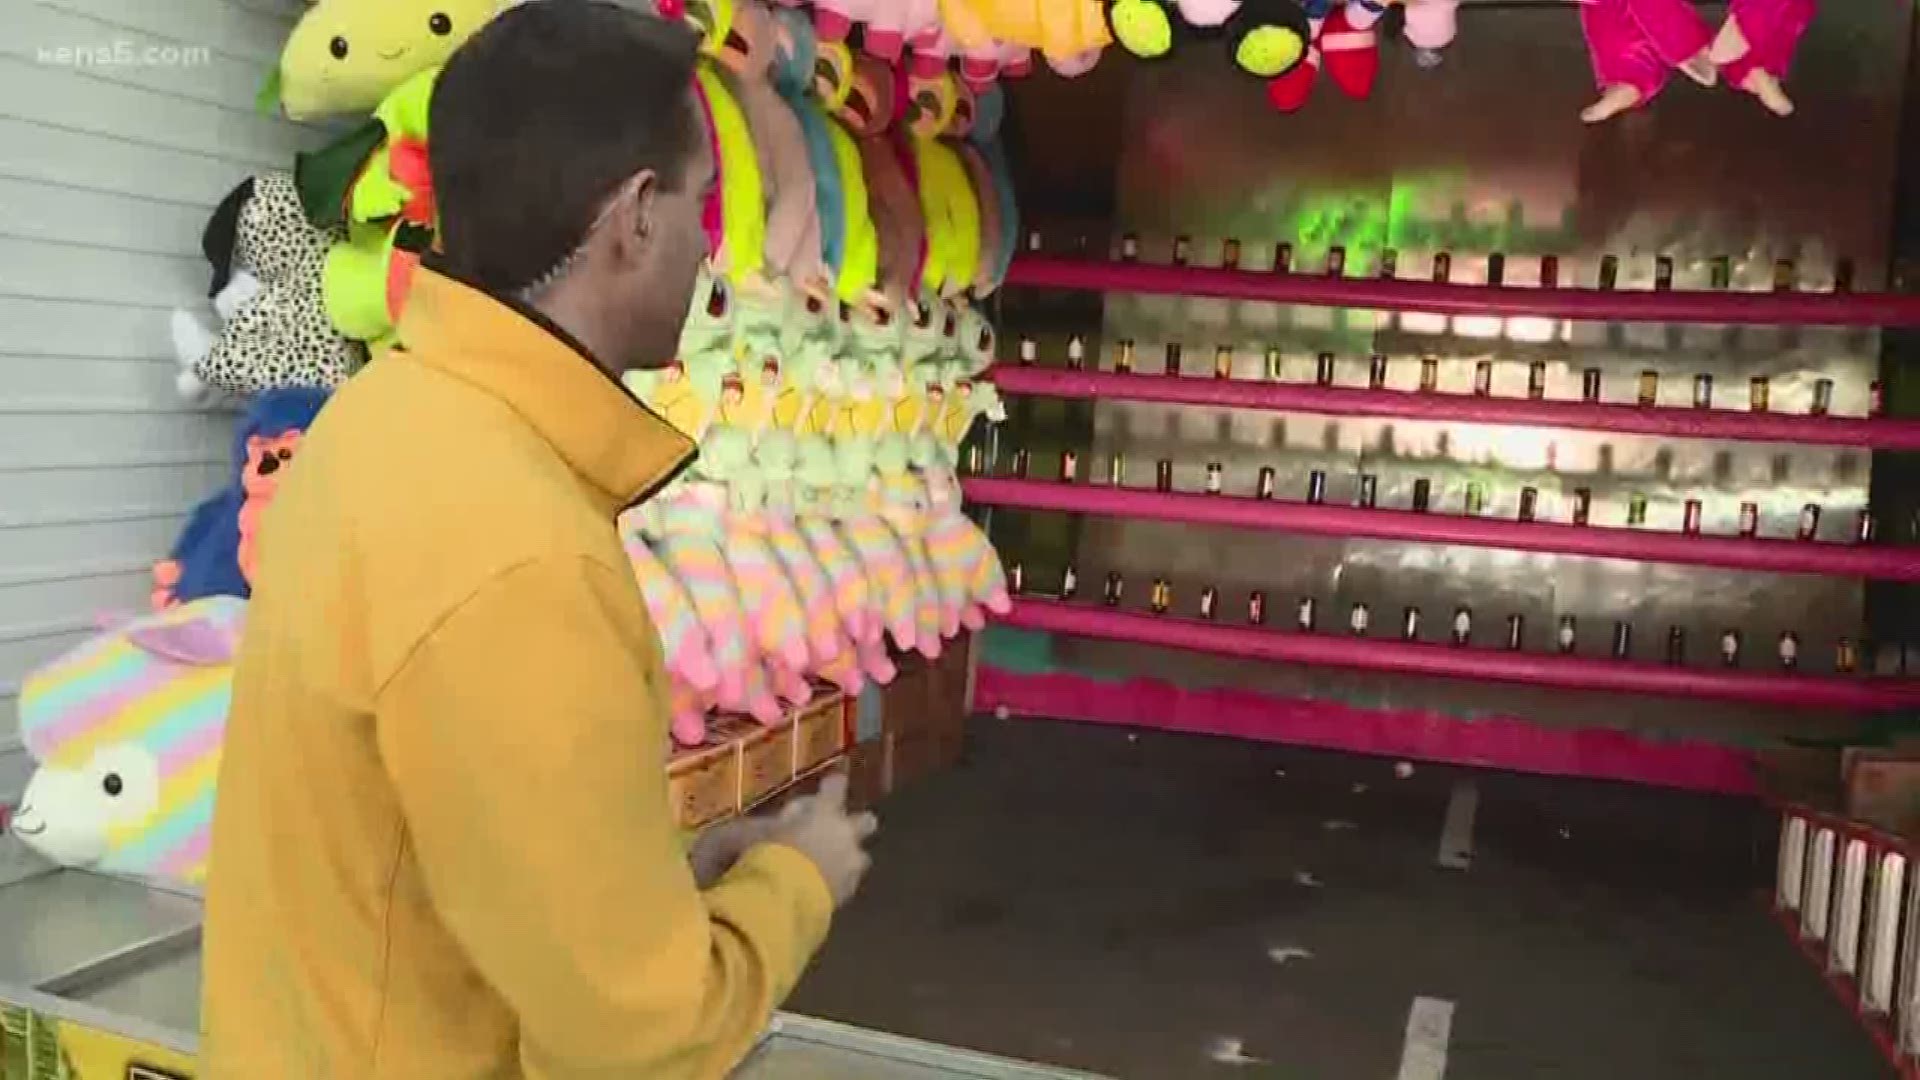 KENS 5's stopped by at the rodeo's carnival, and tried his hand at some dart-throwing!